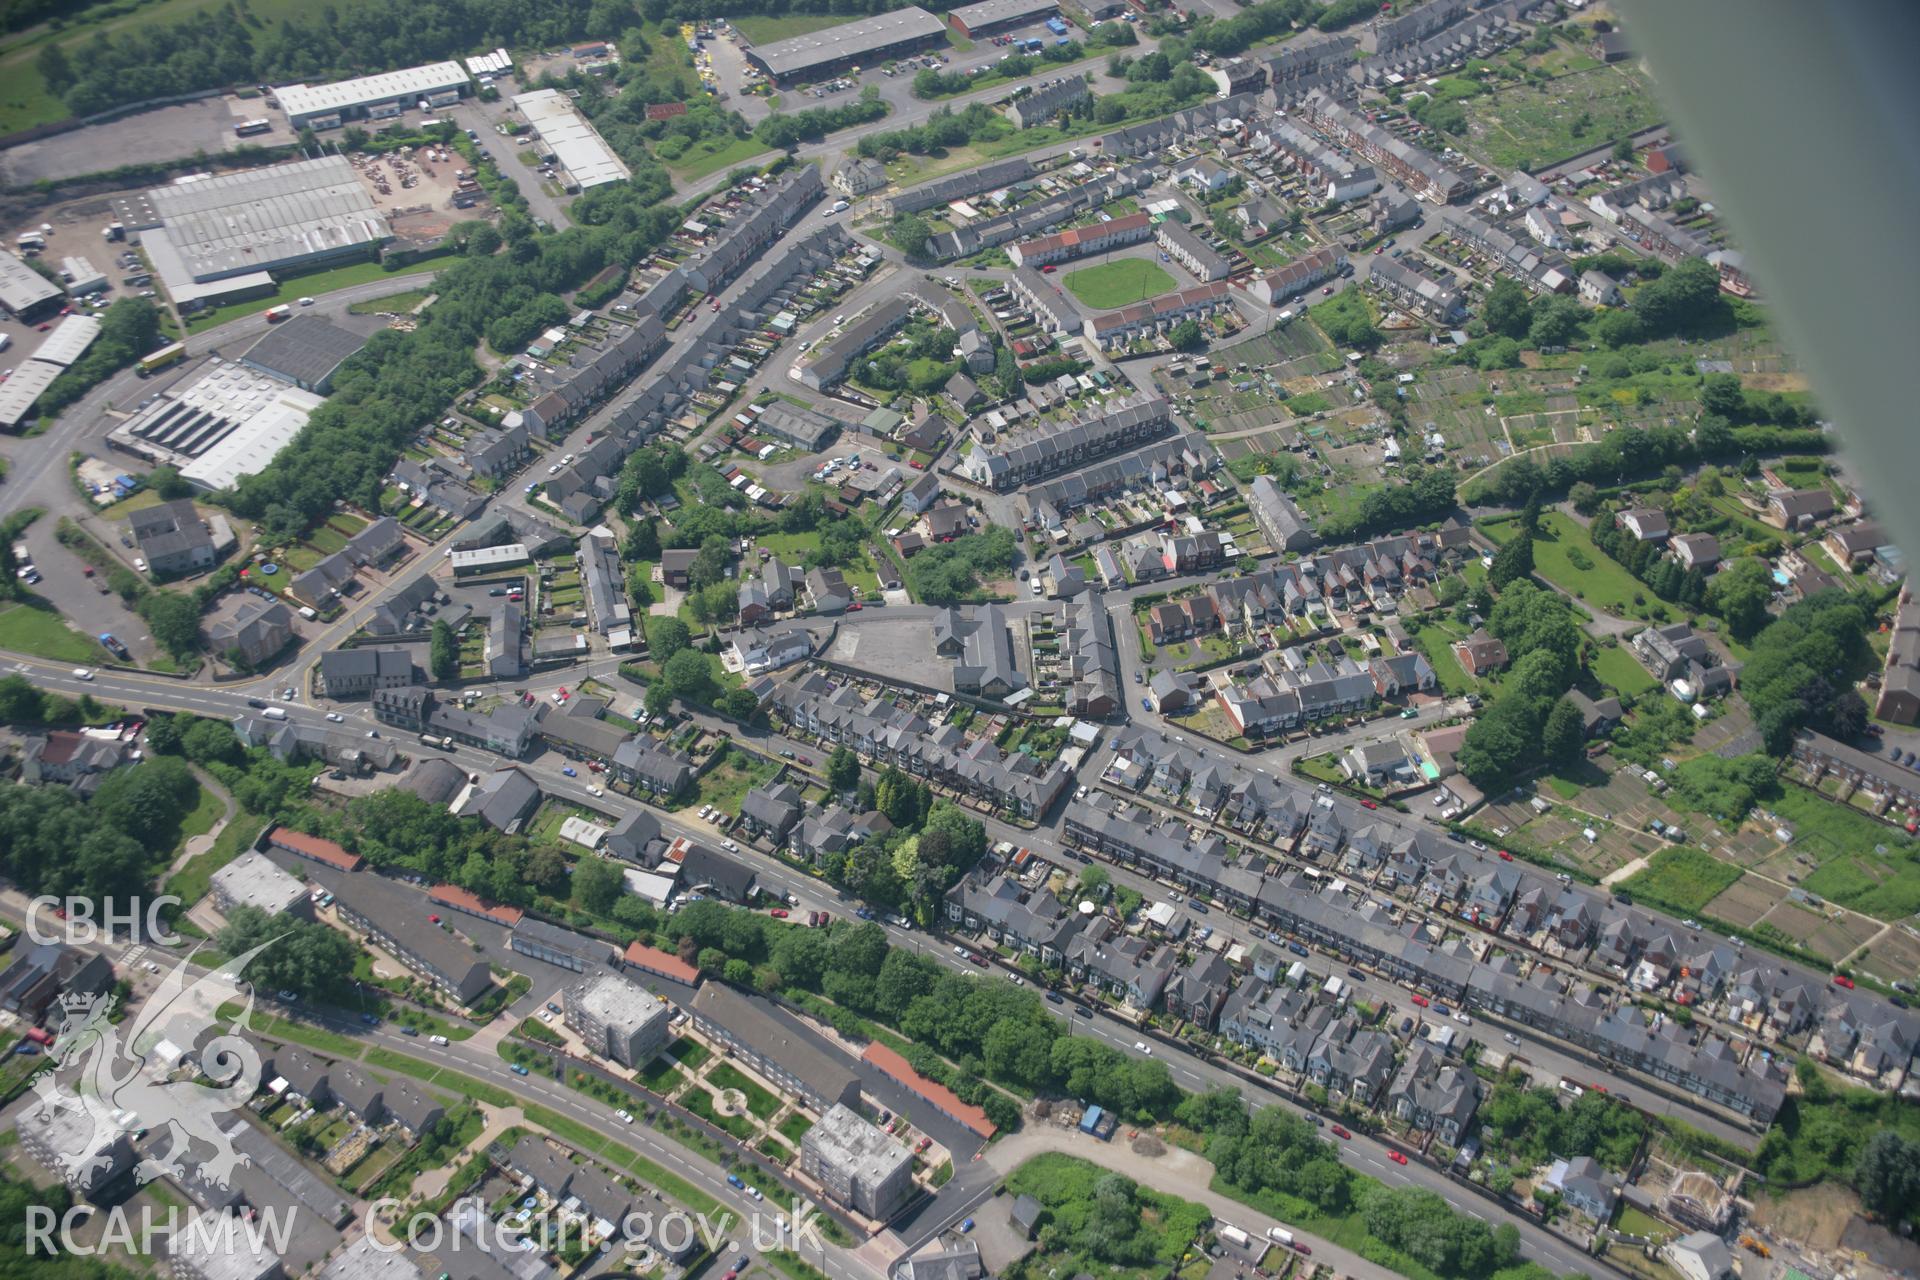 RCAHMW colour oblique aerial photograph of Pontypool from the north-east showing housing at Mount Pleasant. Taken on 09 June 2006 by Toby Driver.